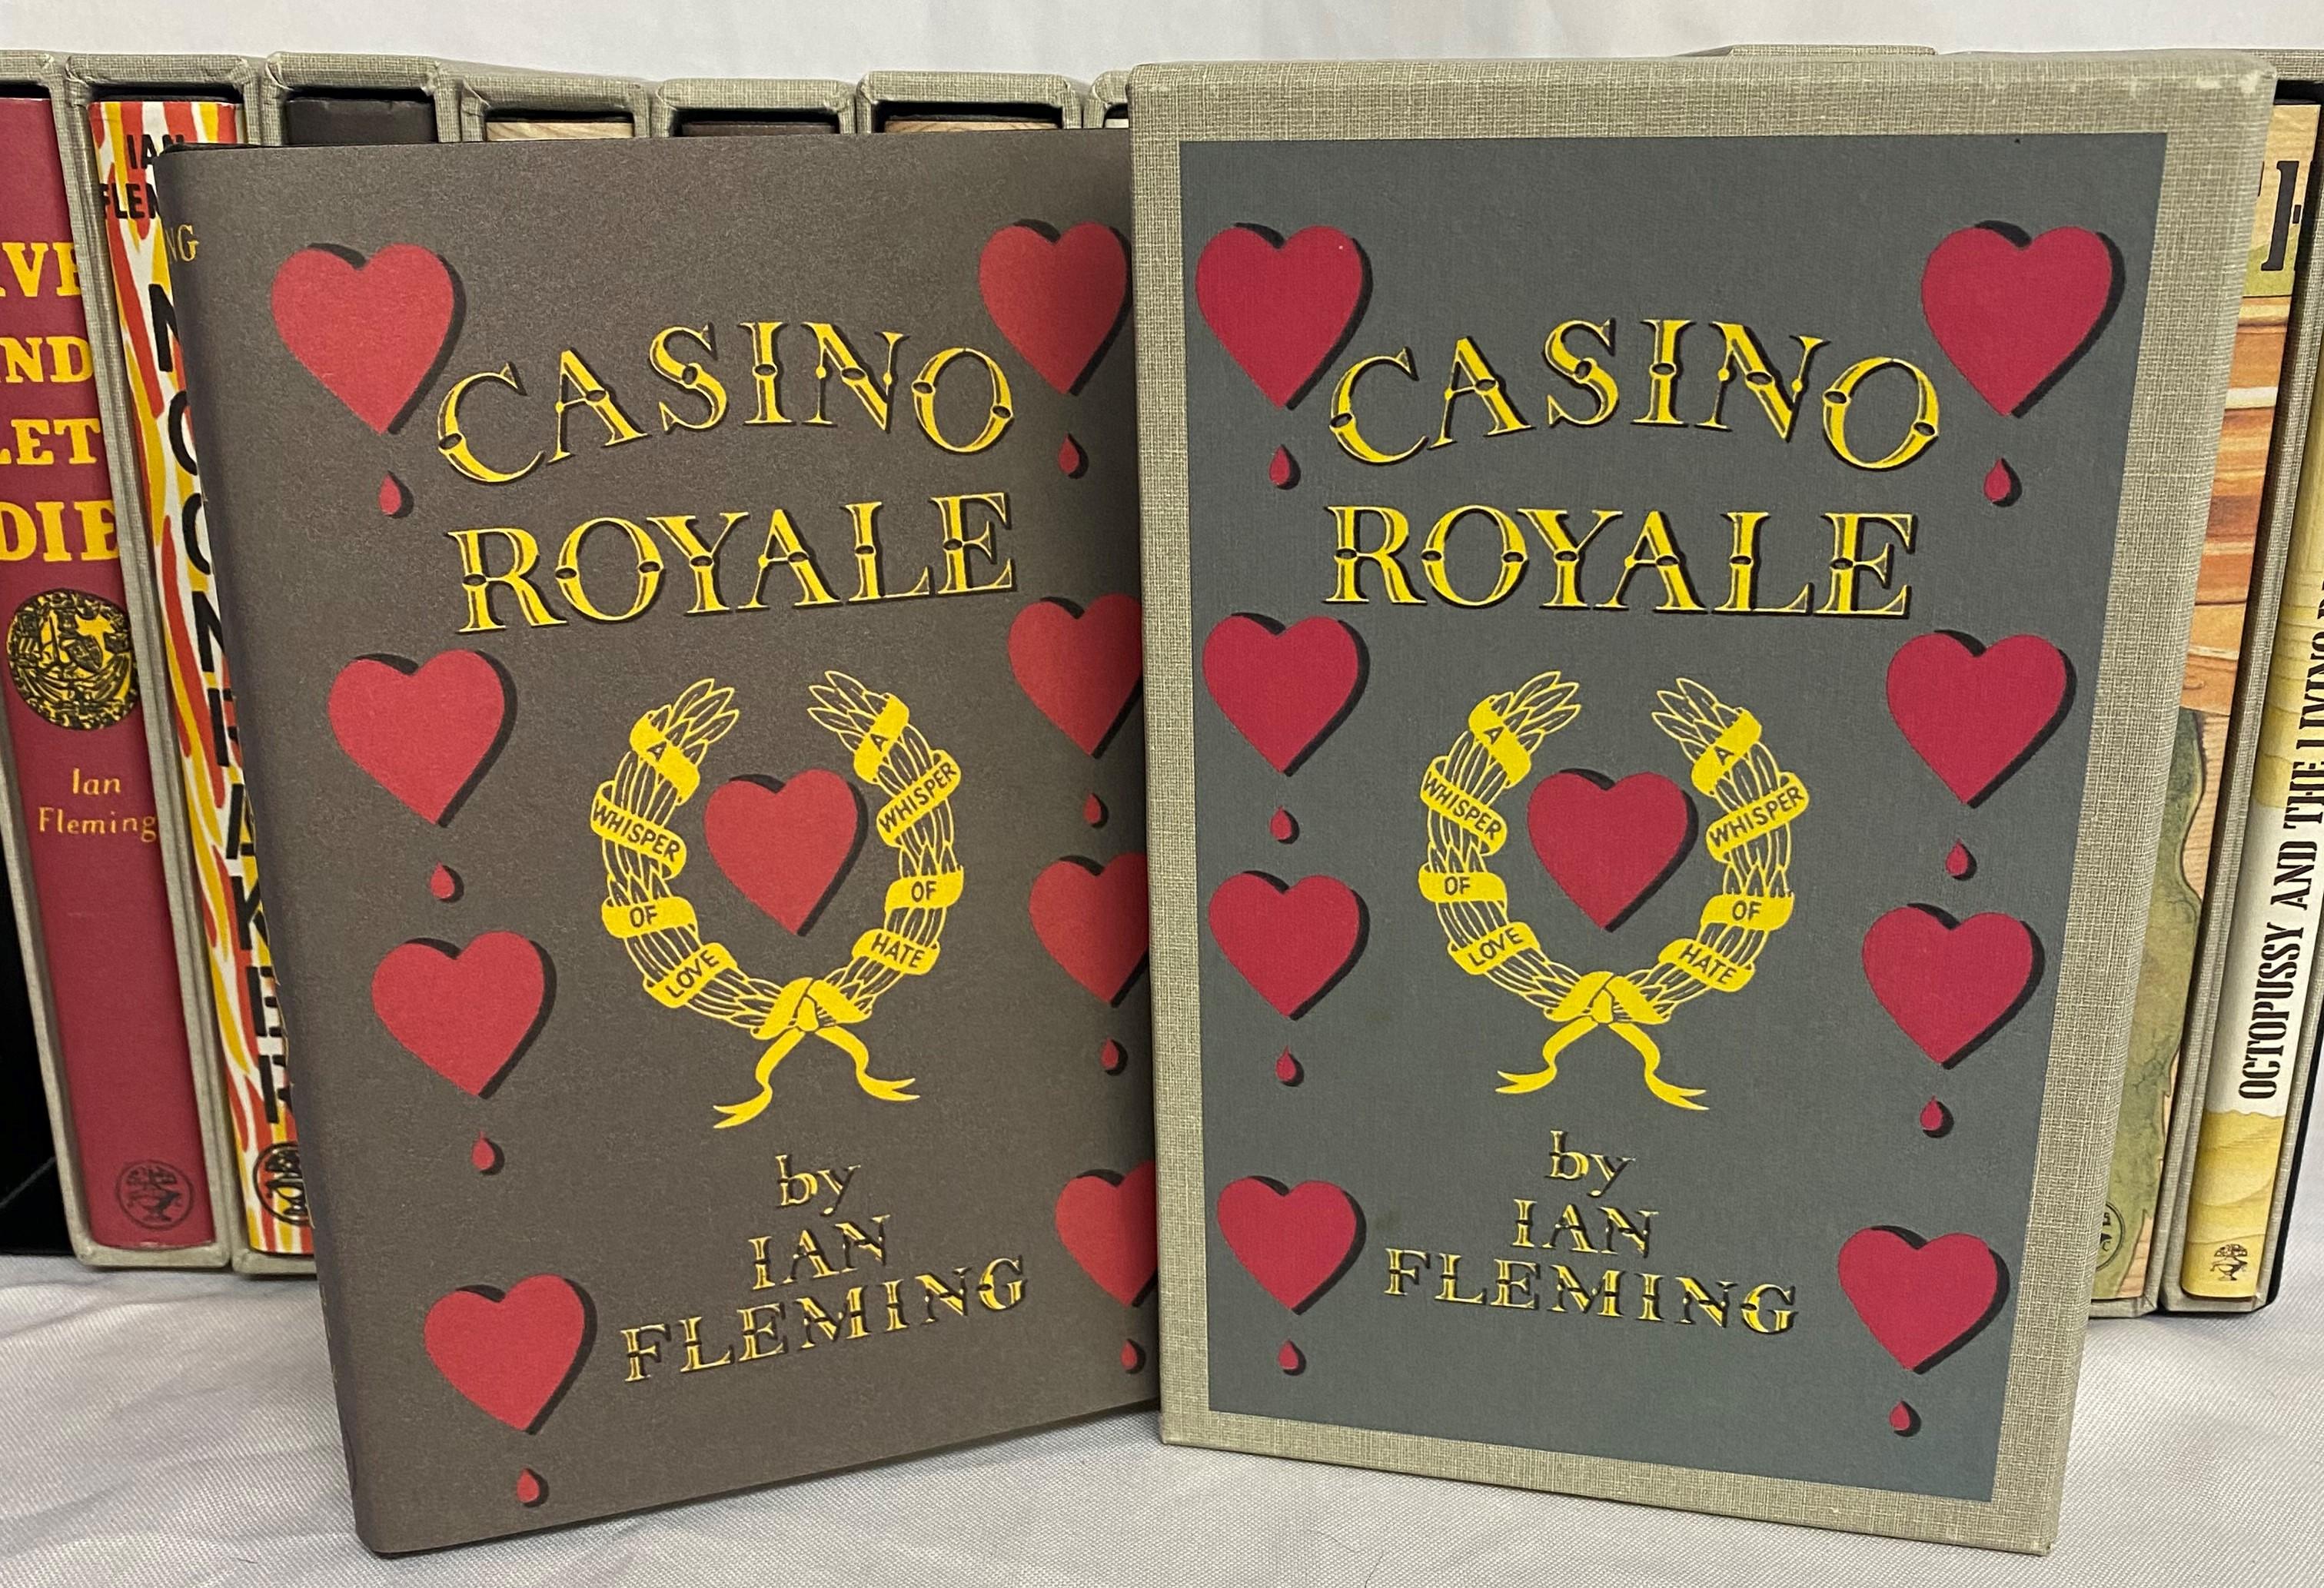 We are offering a complete set of all 14 of Ian Fleming's James Bond Books which were published by 